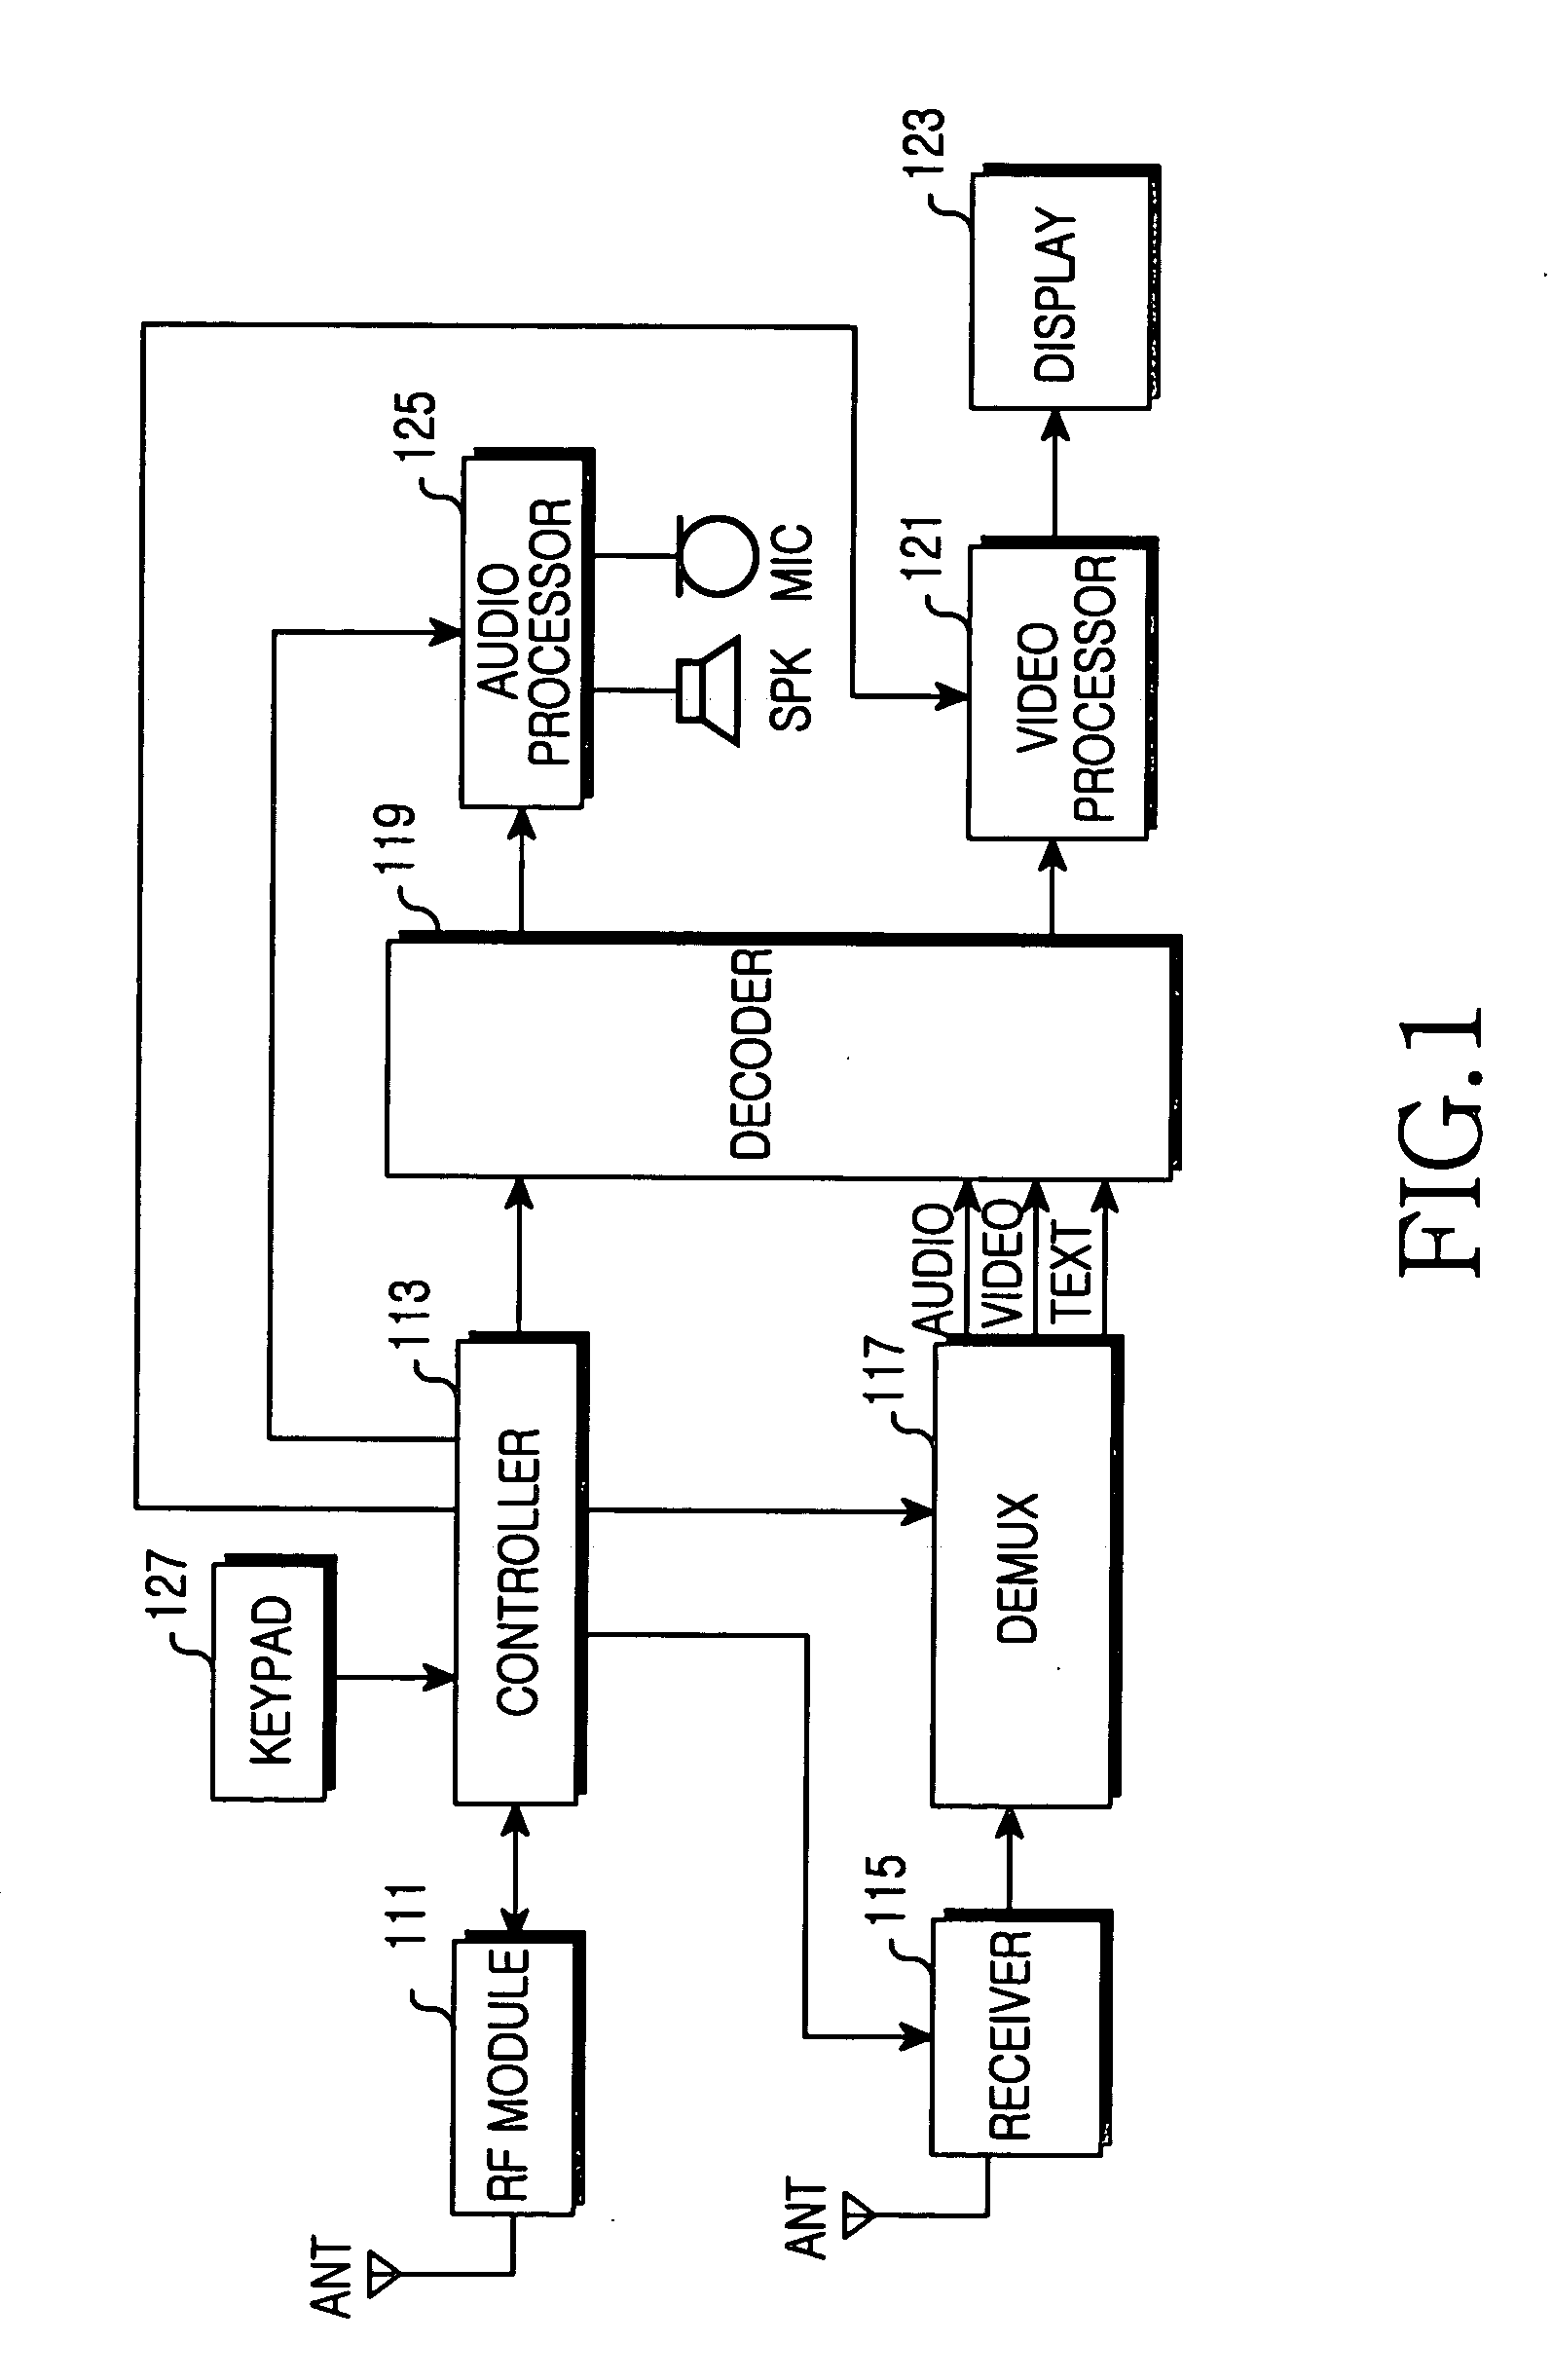 Apparatus and method for processing multimedia audio signal for a voice call in a mobile terminal capable of receiving digital multimedia broadcasting service